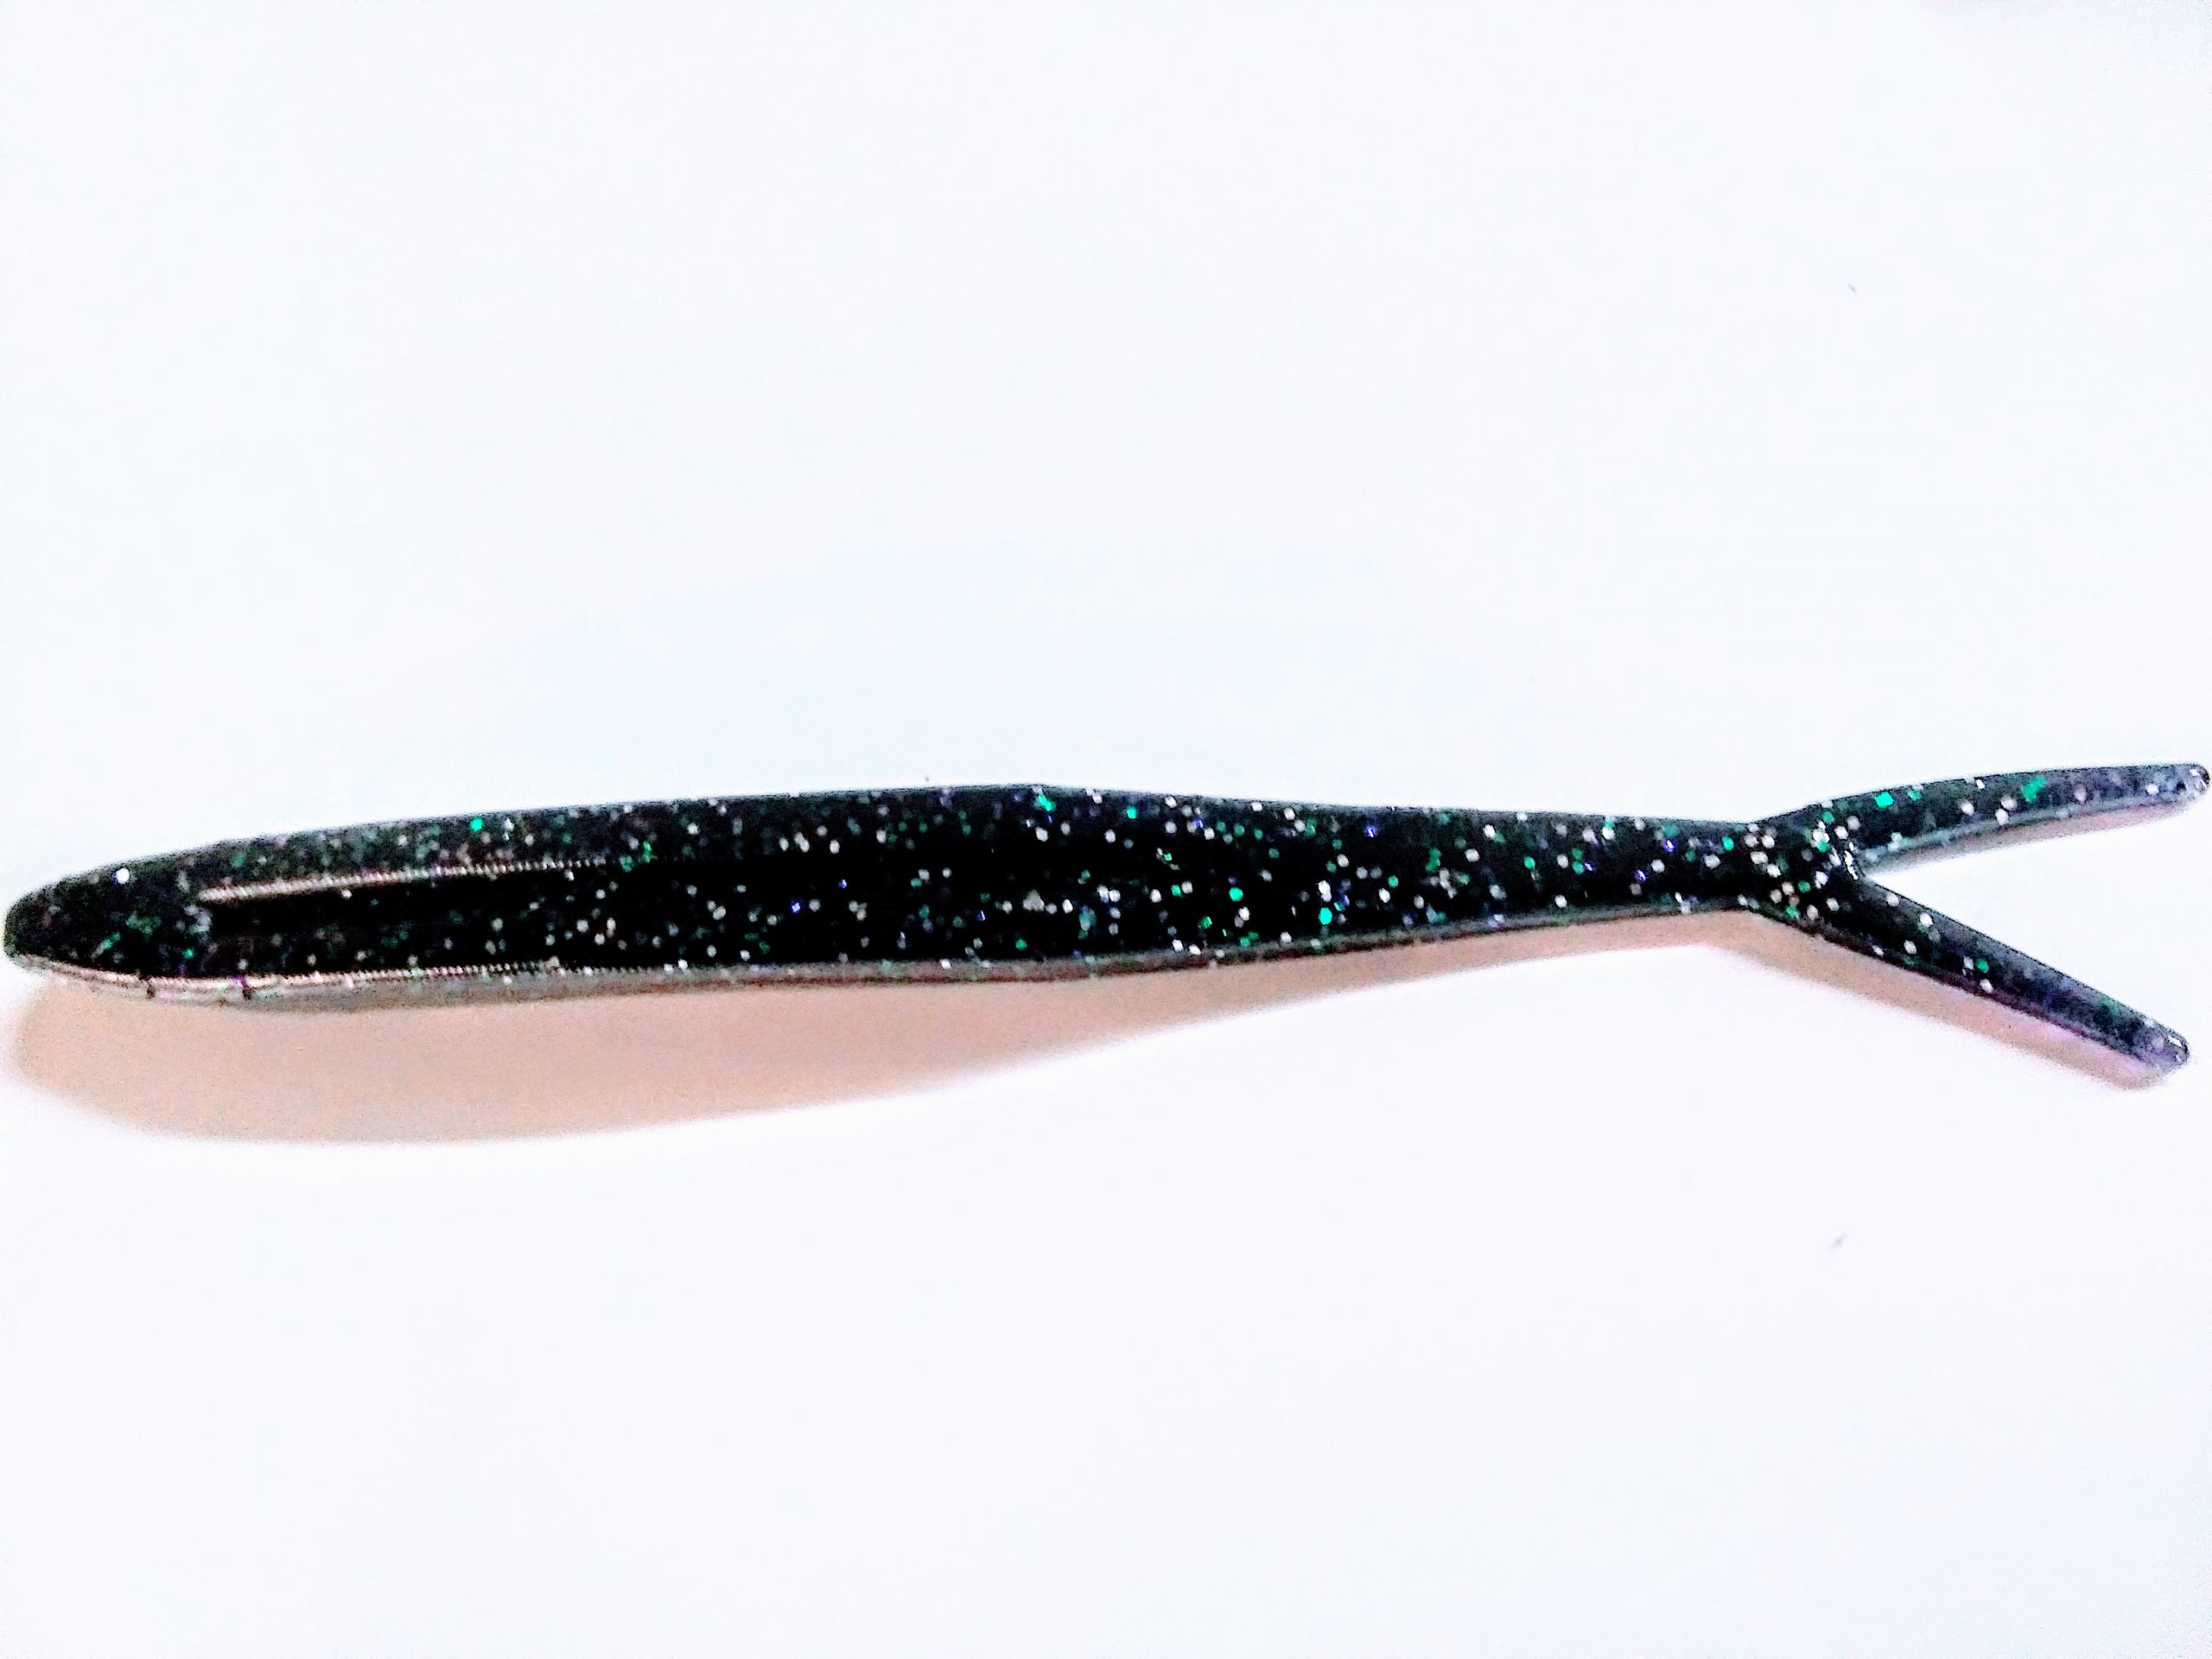 Jerk-bait 5 inch we call lake buster - Get Hooked Magic Baits